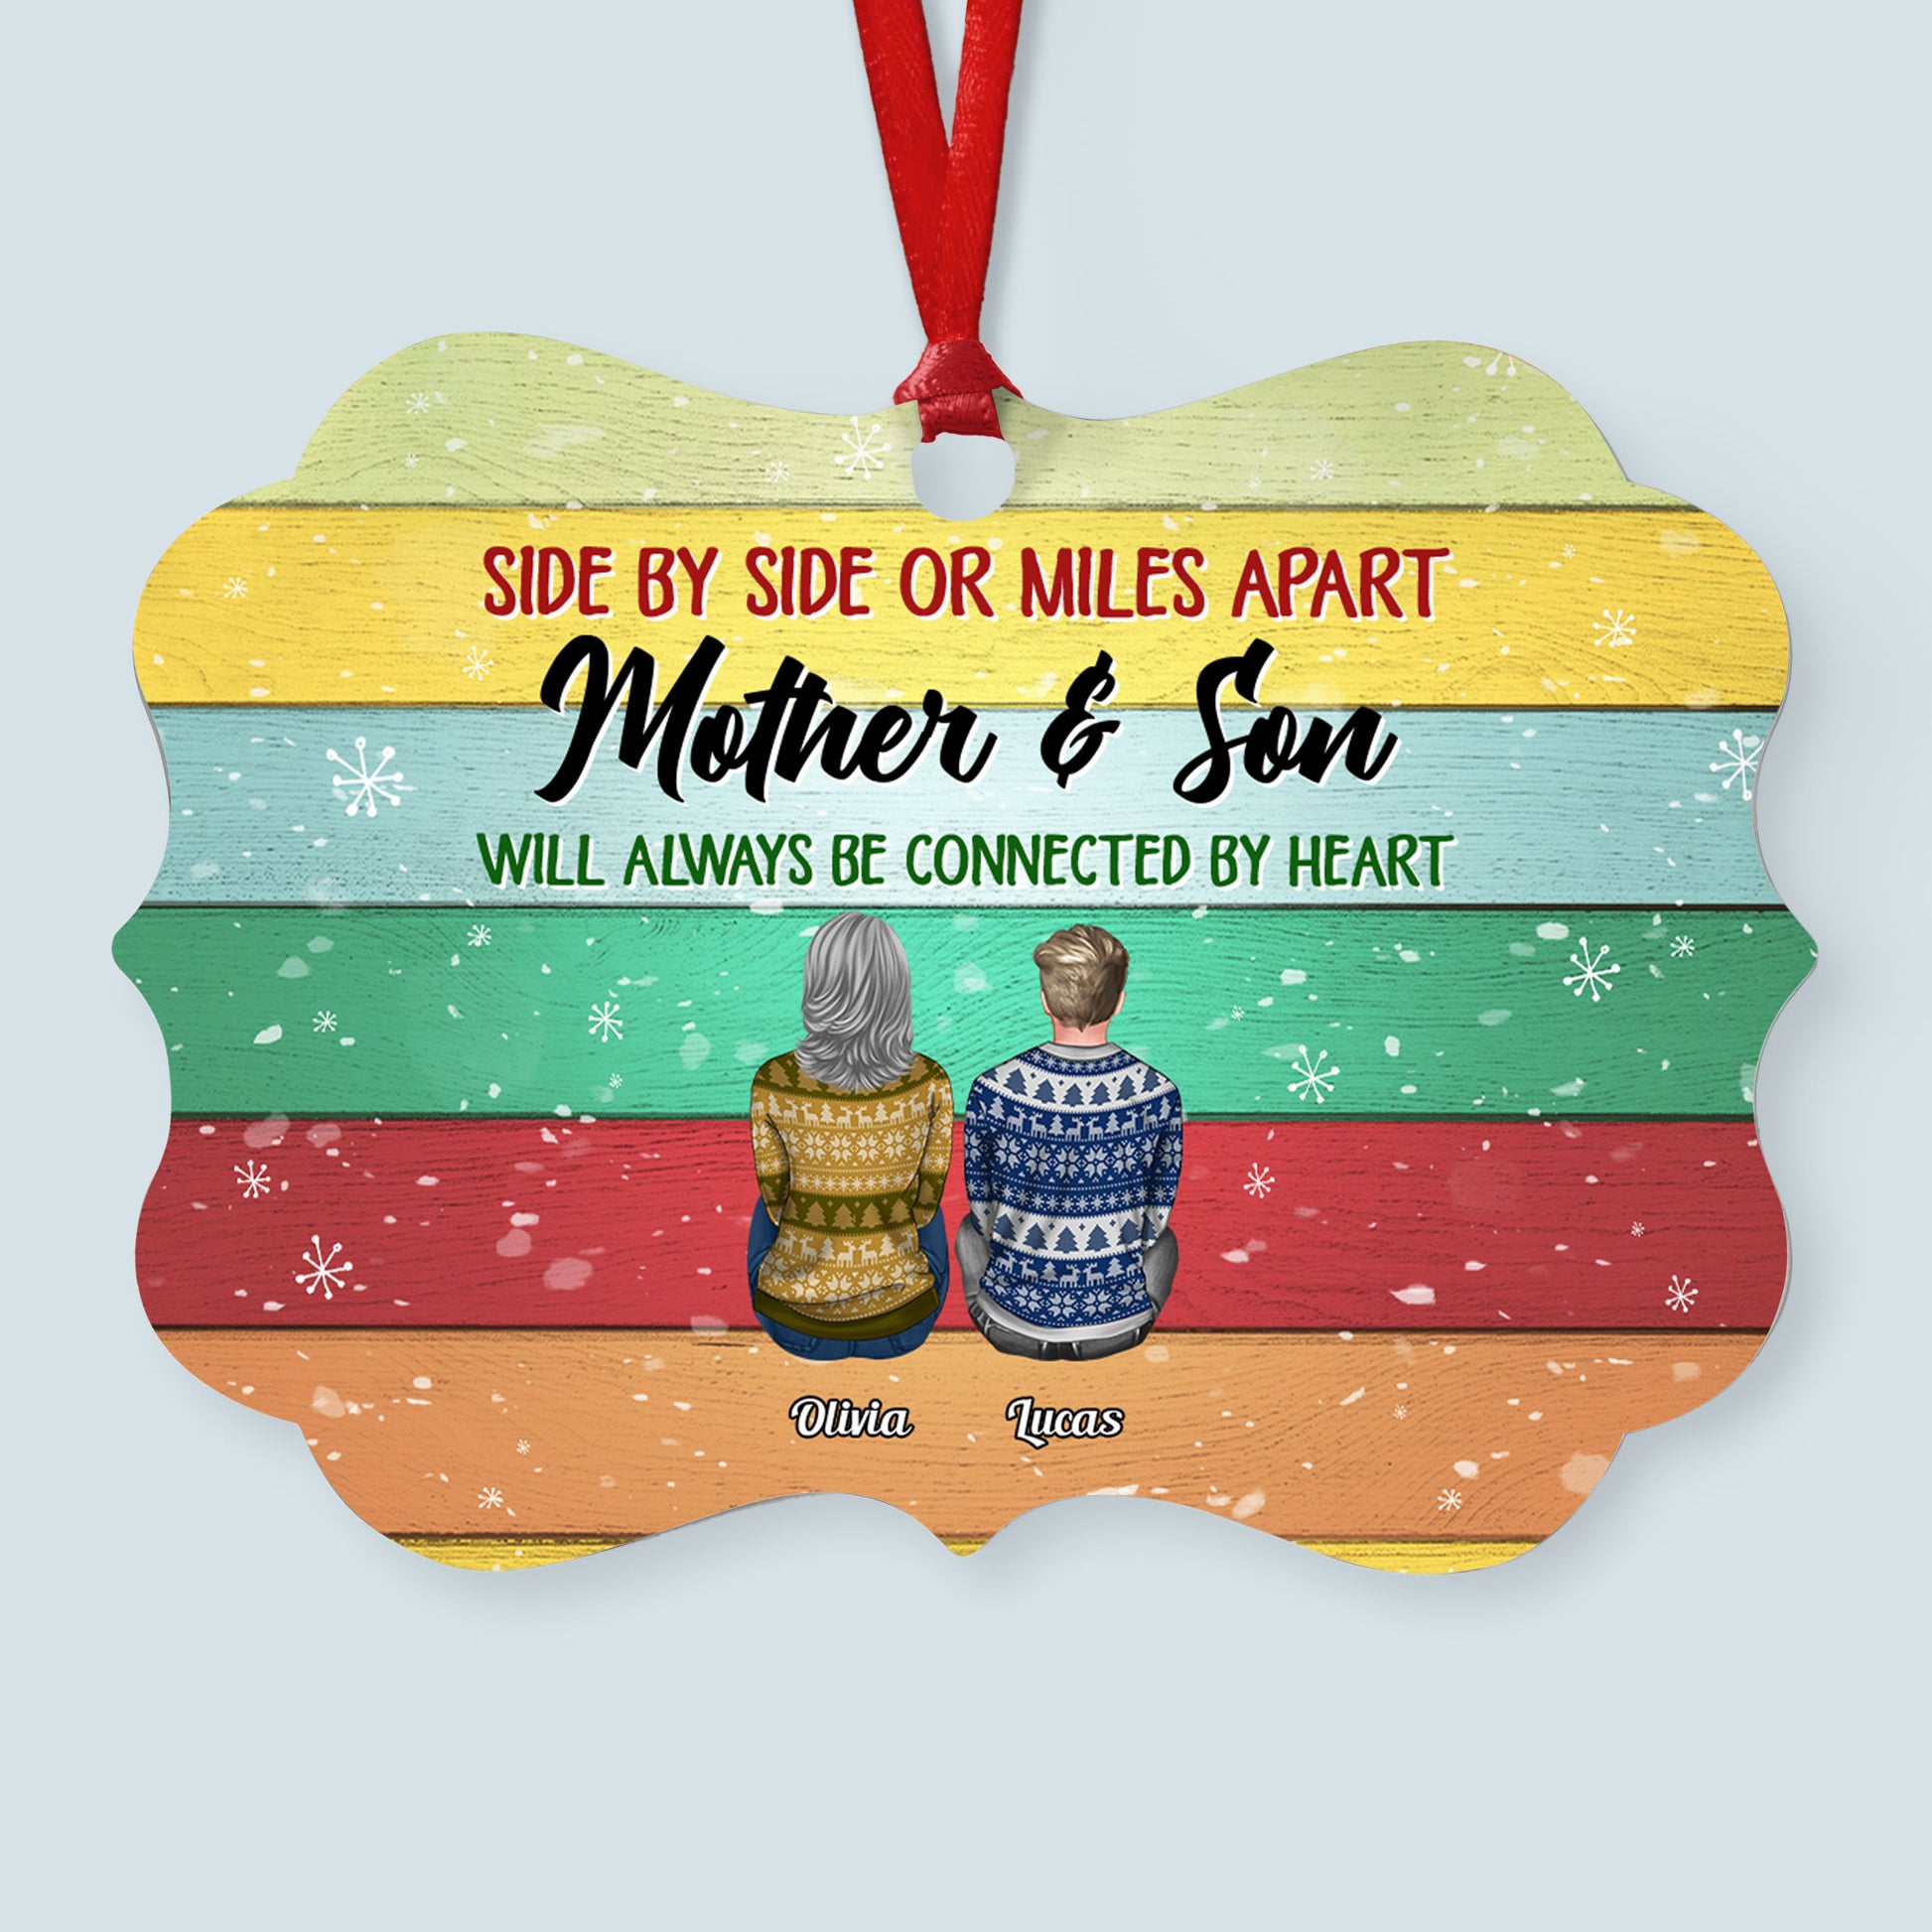 The Love Between Mother And Son Is Forever - Personalized Aluminum Ornament  - Ugly Christmas Sweater Sitting